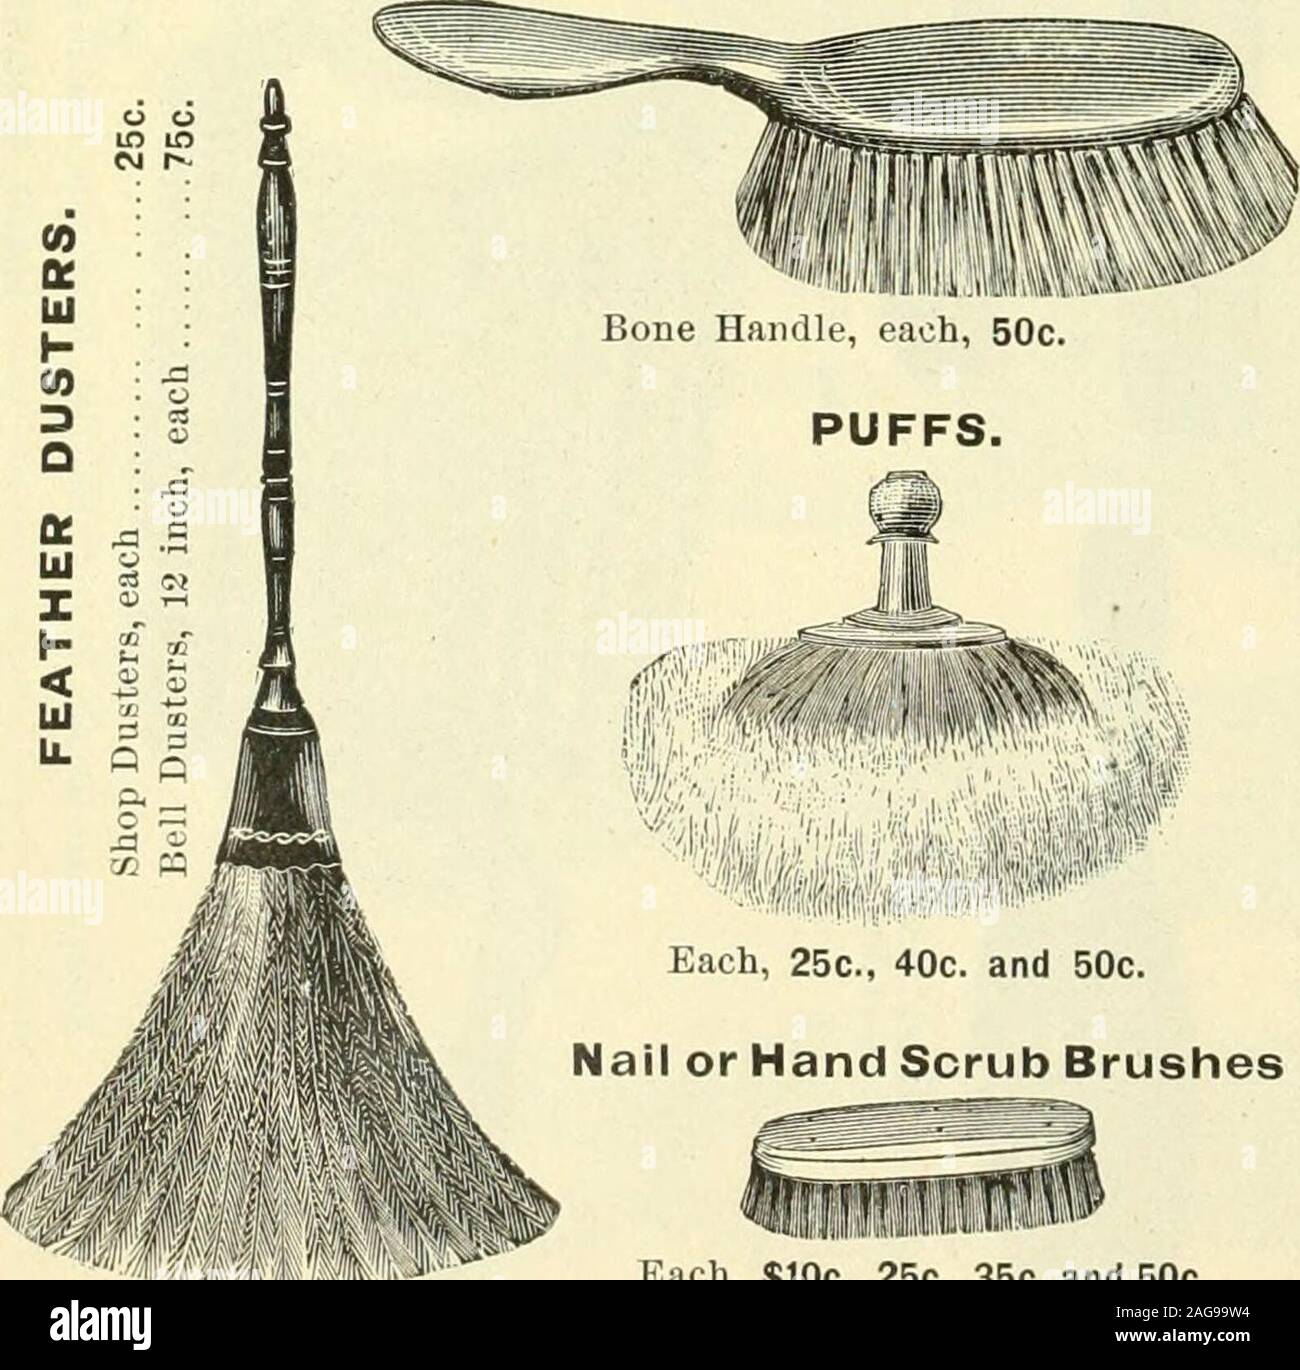 . Price list and barbers' purchasing guide of barbers' chairs, furniture, and barbers' supplies ... Xo. 3. Xo. 52. Xo. 1. EACH. 60c. 3. French Bristles, lar^e 2. Enameled Handle, French Bristles 50c 1. Plush Covered Back, Horse Hair 40c TOOTH BRUSHES. Illikiilillf Per dozen, $1.00, $1.25 and $1.50 WHISKS. FACE BRUSH-( Very Soft.). PUFFS. ^jv^r Each, 25c., 40c. and 50c.Nail or Hand Scrub Brushes Stock Photo